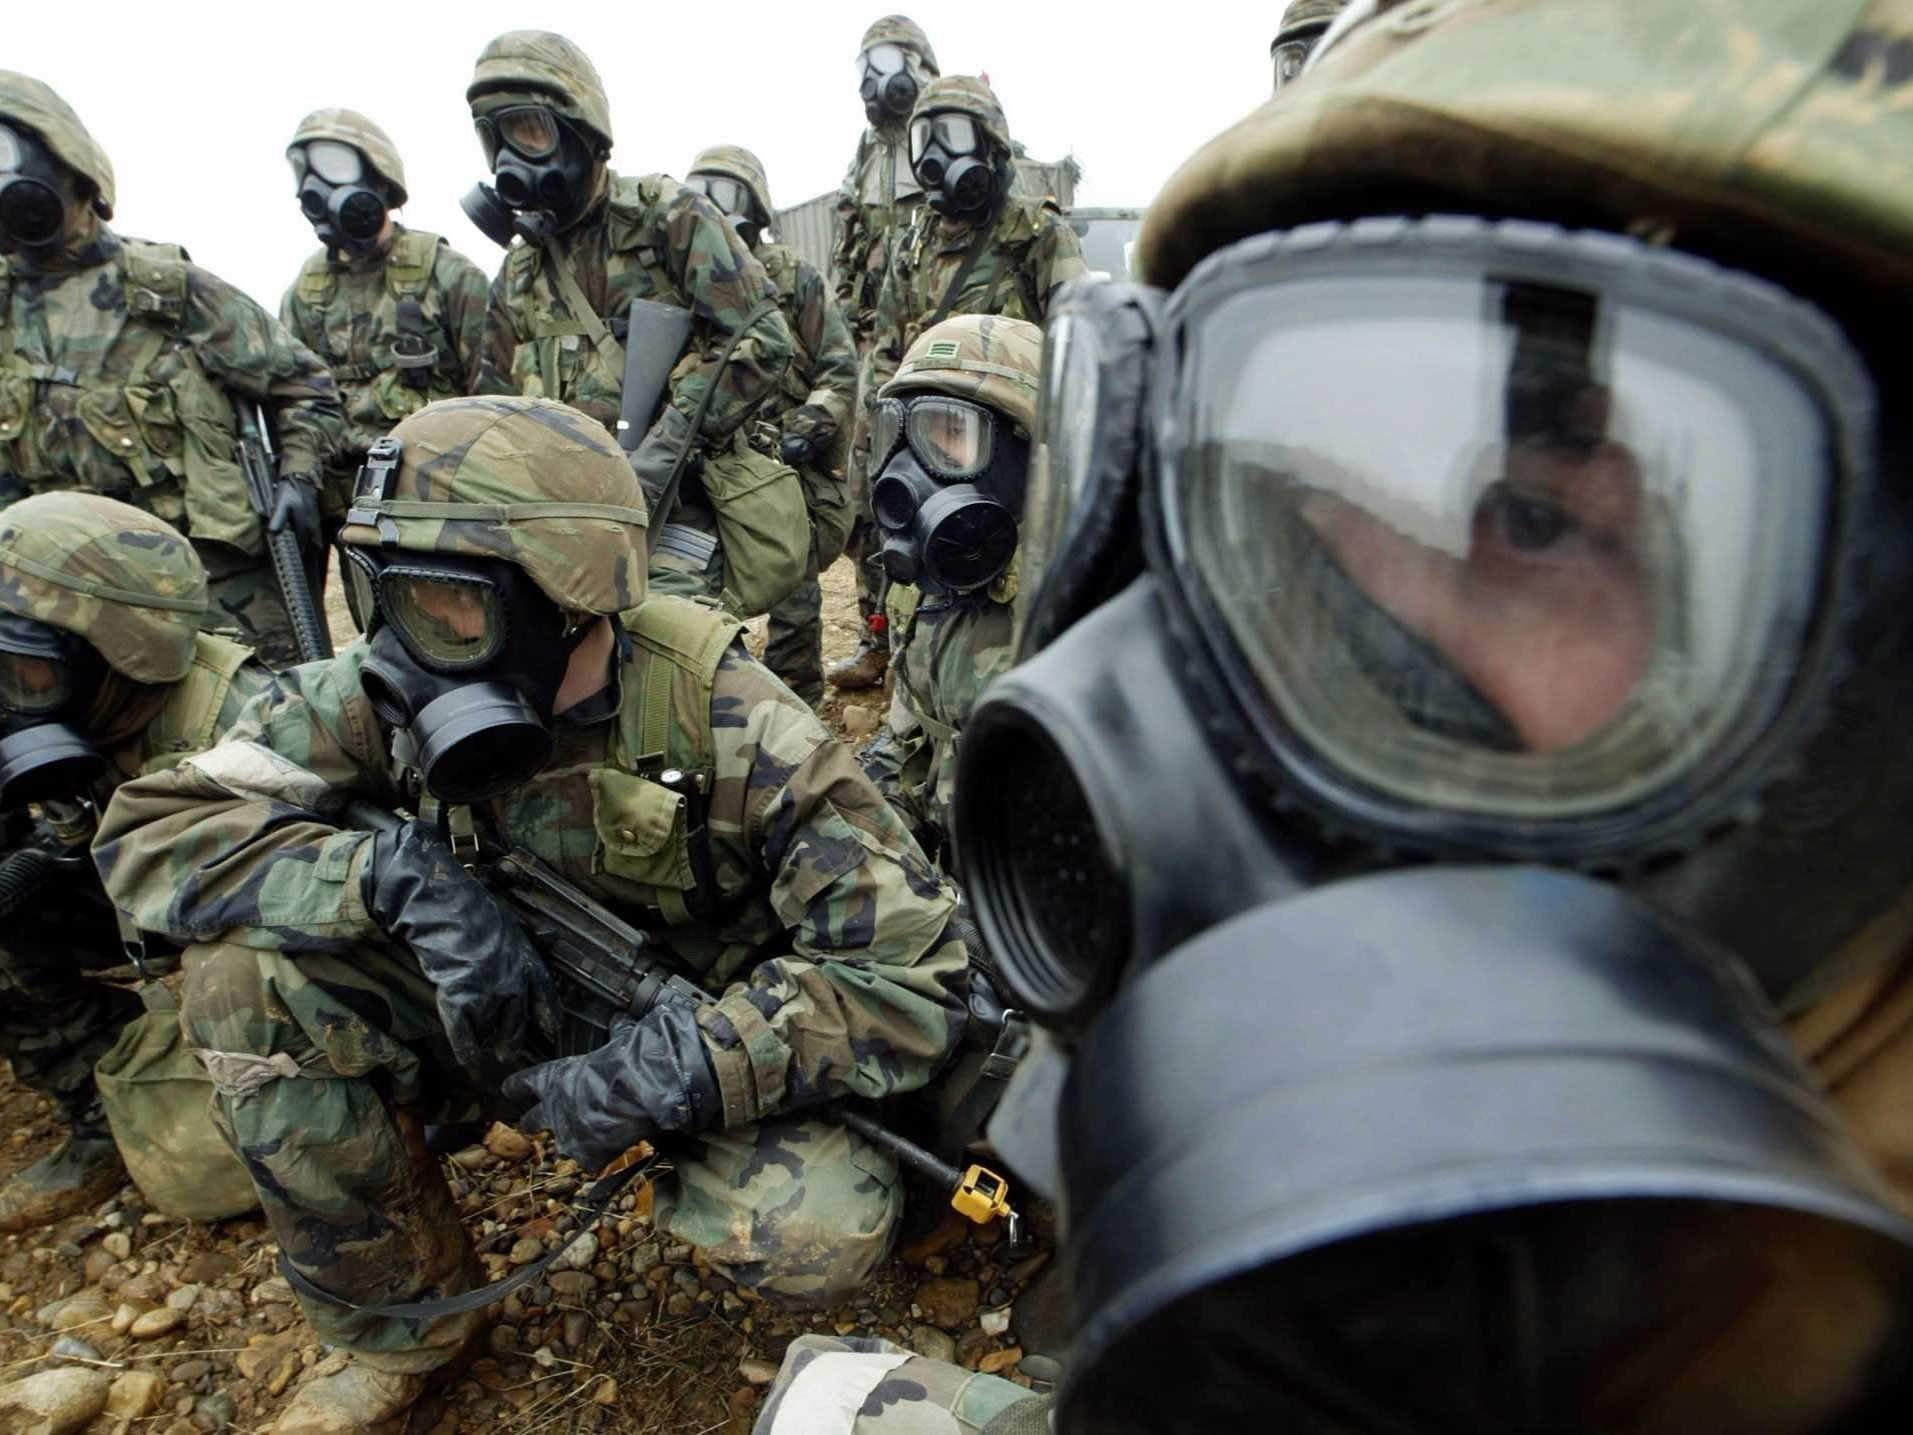 According to bioterrorism experts a deadly plague could potentially be